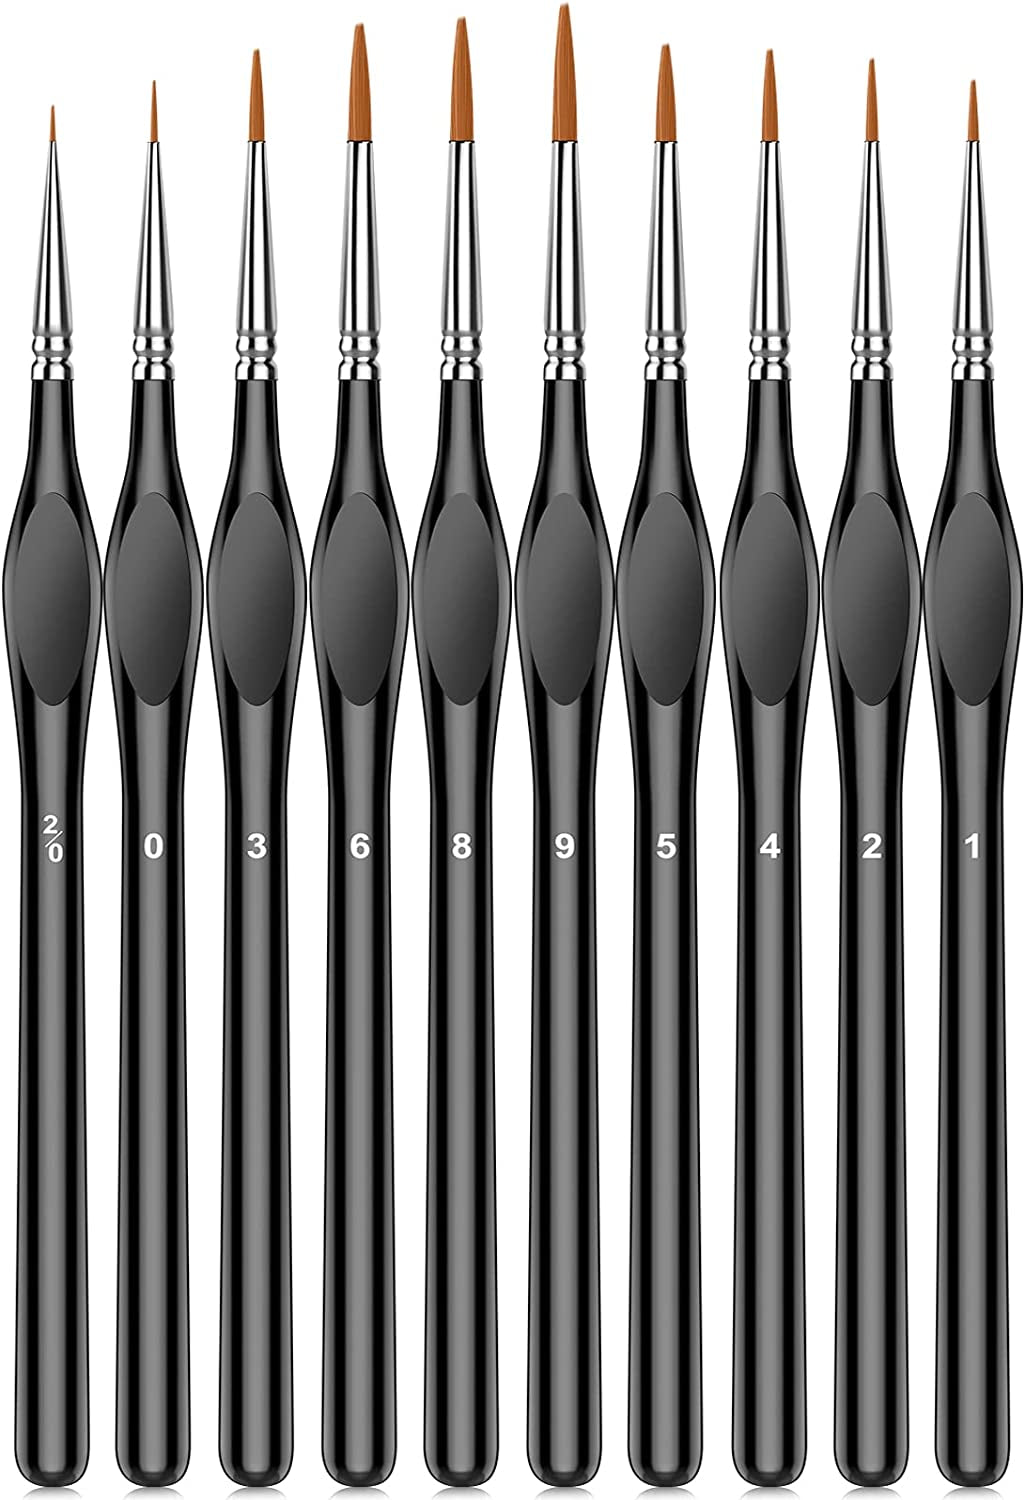 10Pcs Micro Paint Brushes Set with Triangular Handles - for Acrylic, Watercolor, Crafts, Models